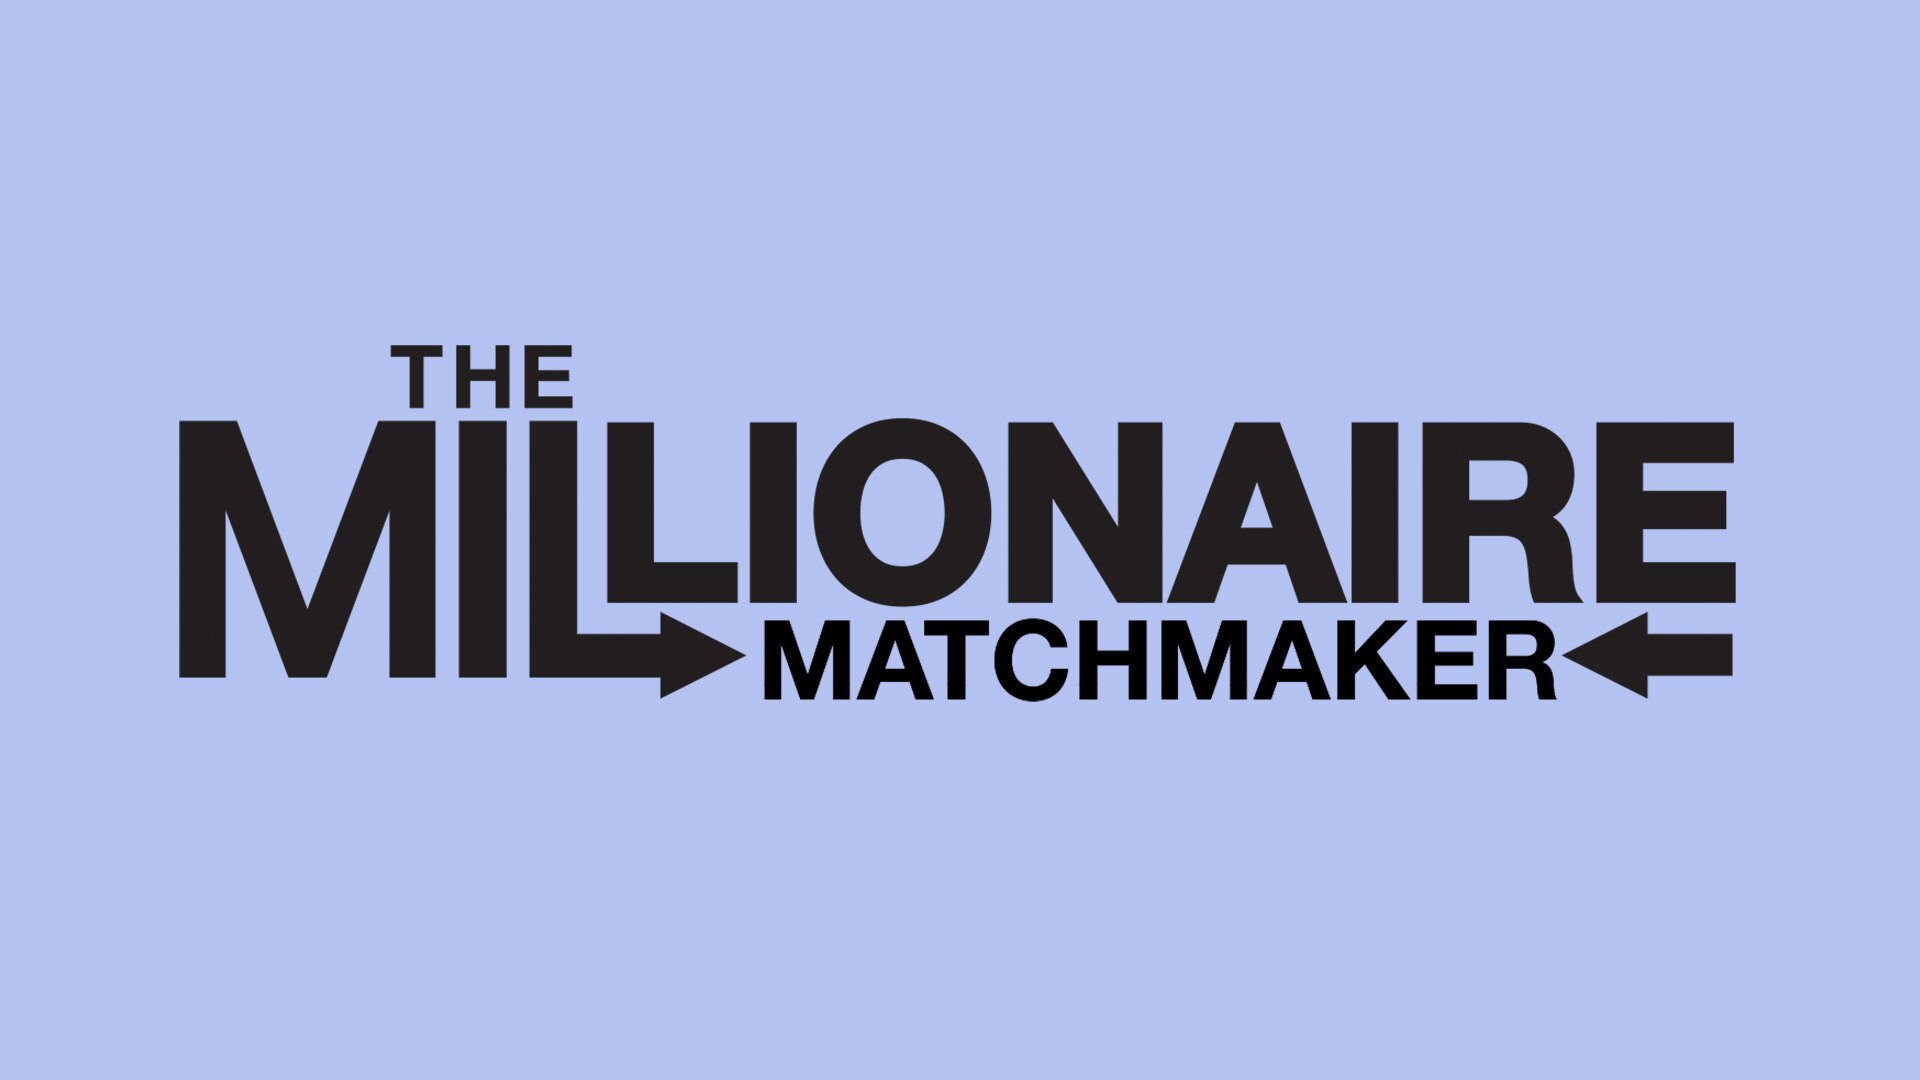 is the millionaire matchmaker still in business